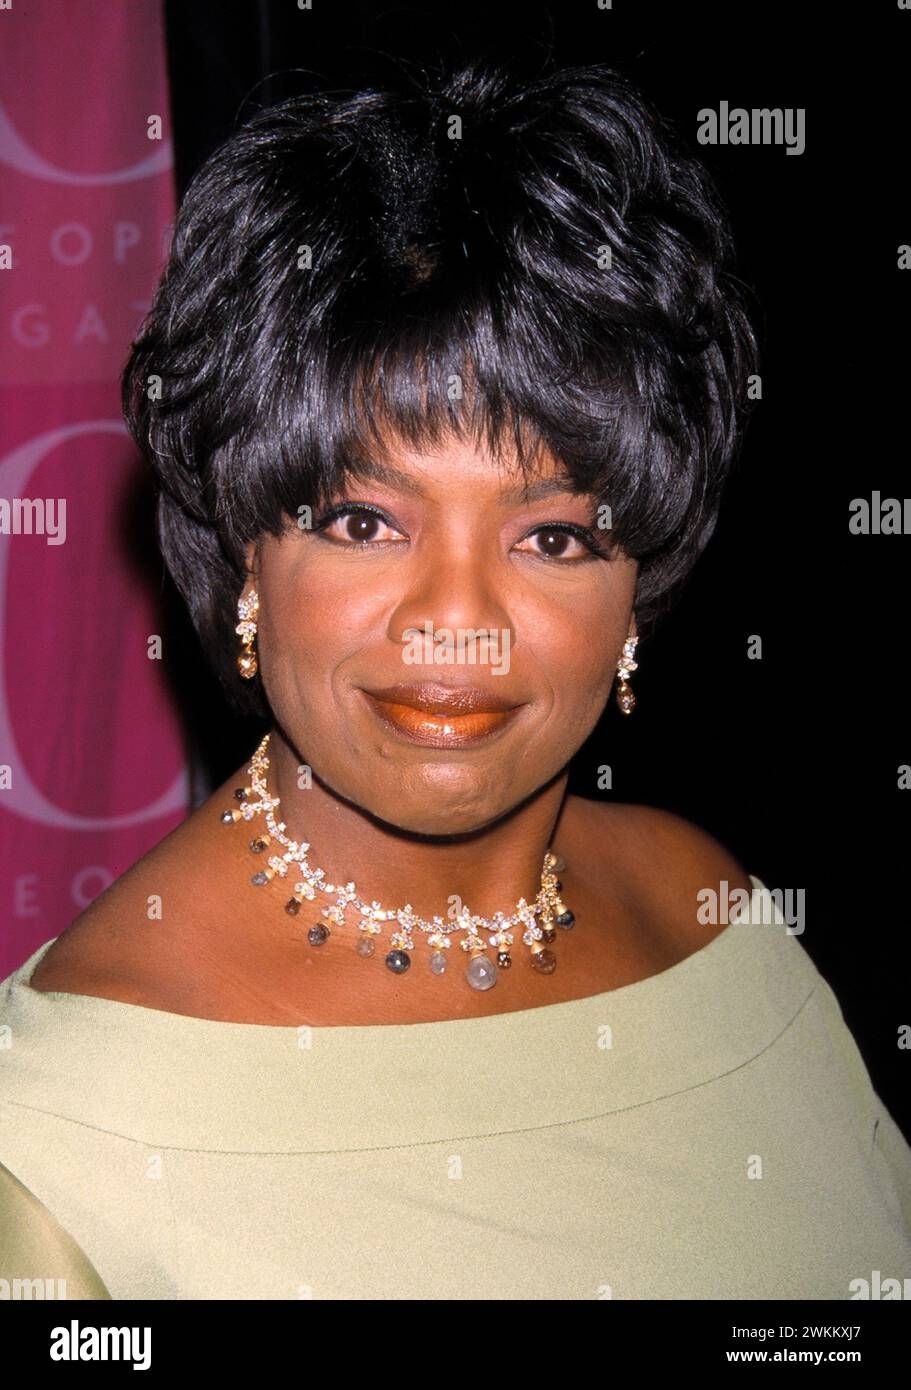 Credit: Walter McBride/MediaPunch OPRAH WINFREY, GAYLE KING  AND HEARST MAGAZINES  4/17/2001 HOST THEIR 1st ANNIVERSARY OF  O  MAGAZINE.  CIPRIANI RESTAURANT IN NEW YORK CITY. CREDIT ALL USES Stock Photo